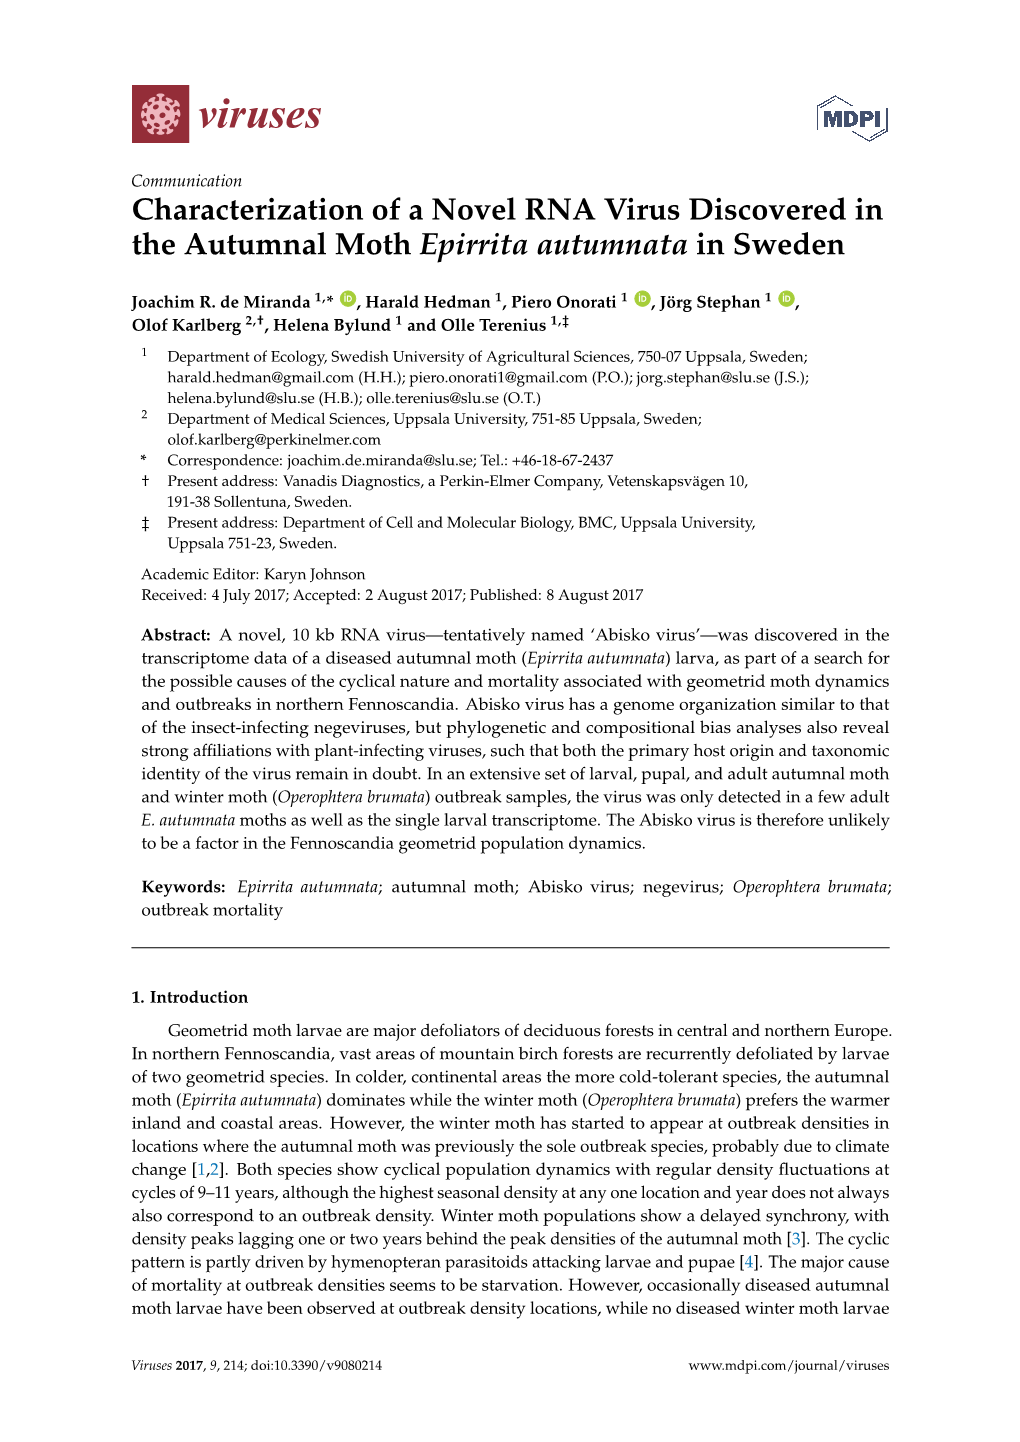 Characterization of a Novel RNA Virus Discovered in the Autumnal Moth Epirrita Autumnata in Sweden